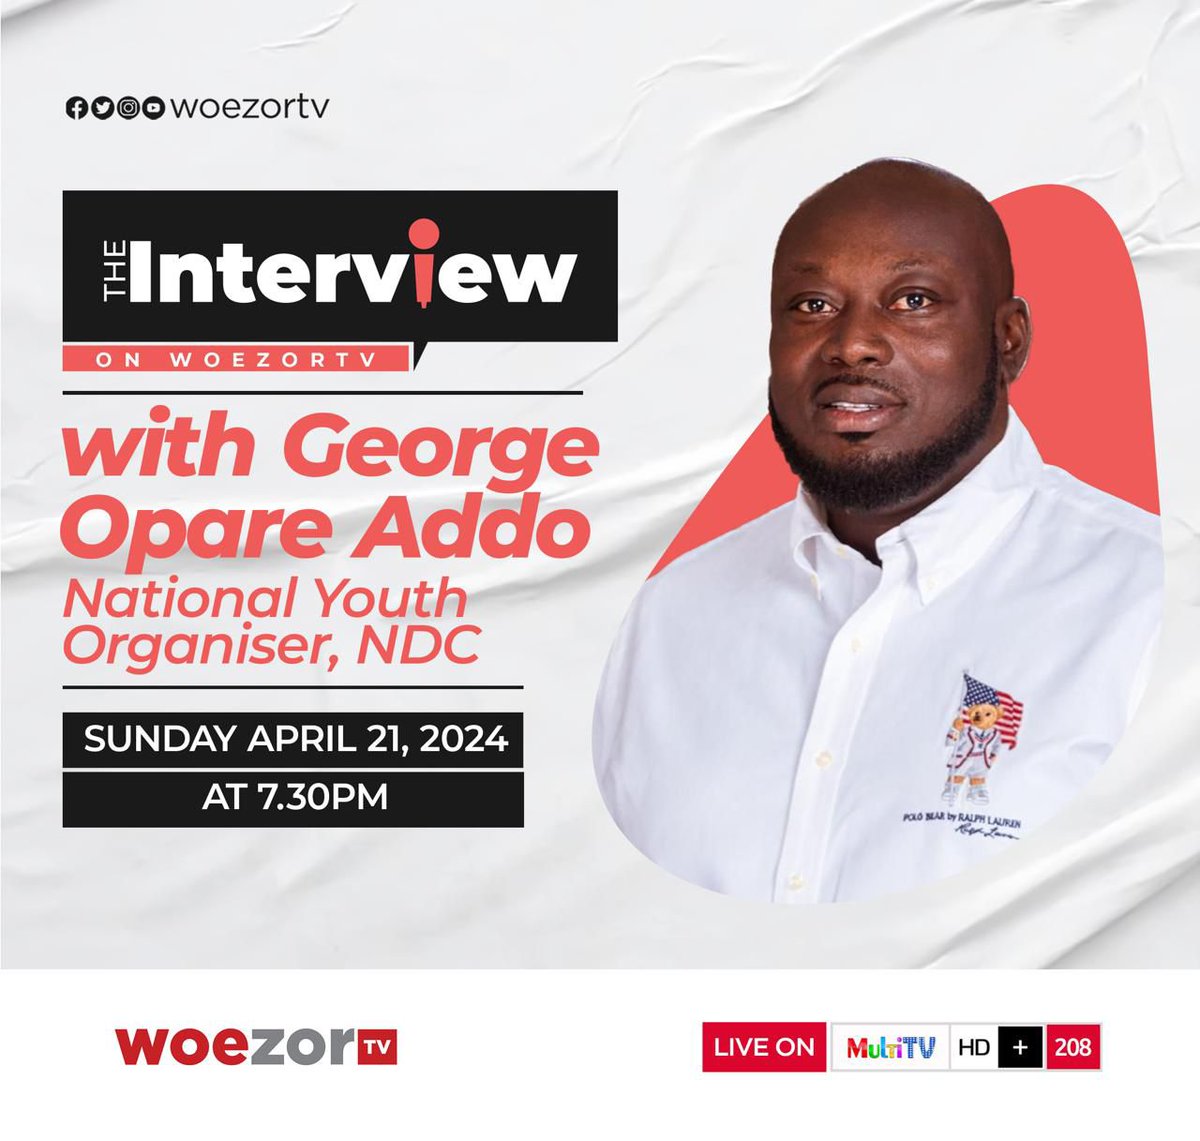 Later at 7.30 pm today, Randy Ahadzi hosts the National Youth Organiser of the opposition National Democratic Congress, George Opare Addo, on #theInterview on WoezorTV.